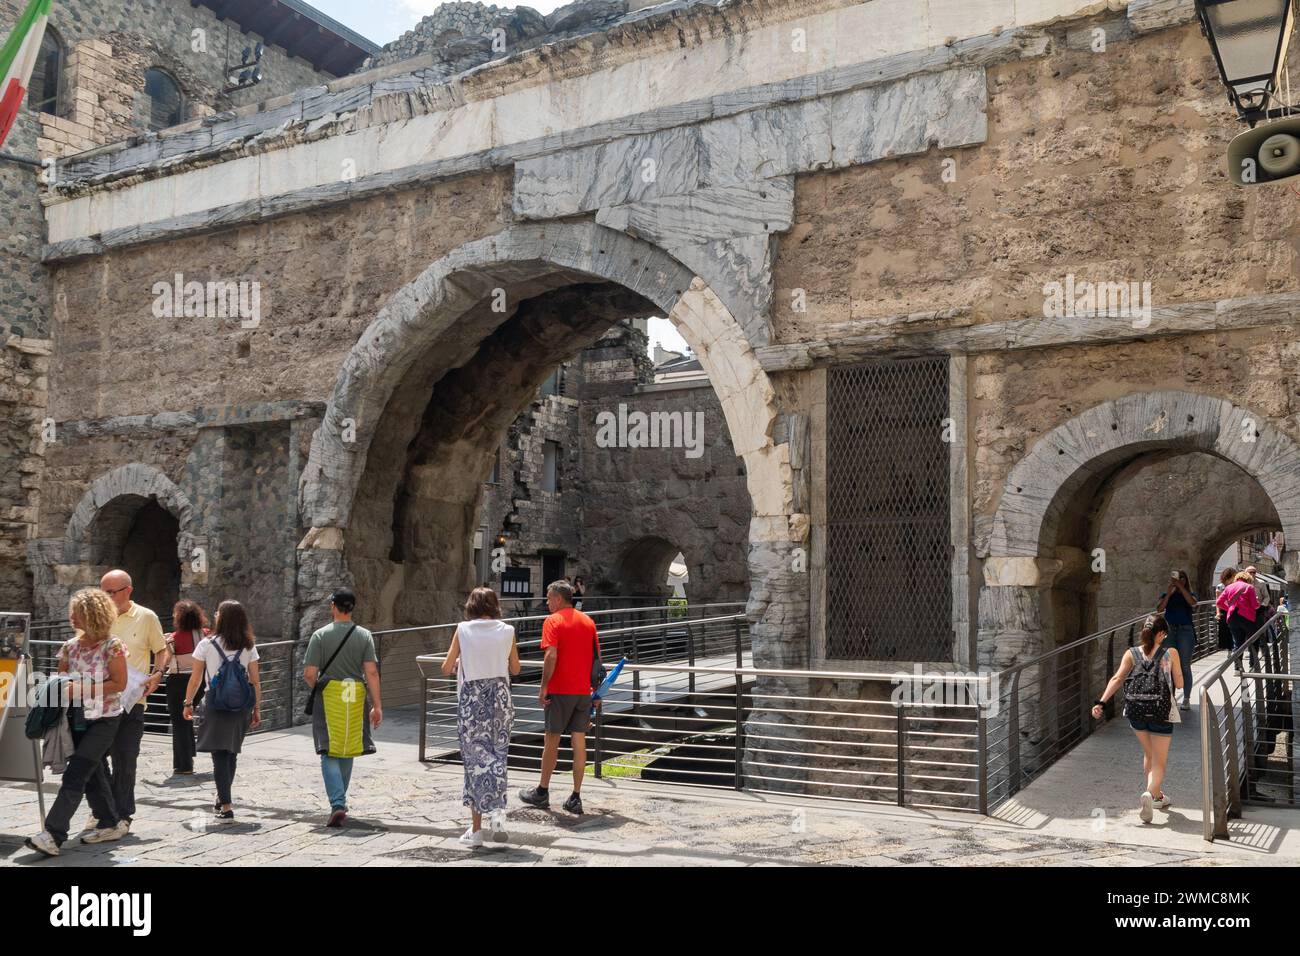 Tourists crossing the Pretoria Gate (25 BC), the Roman city gate, formed by two series of arches enclosing a parade ground, Aosta, Aosta Valley, Italy Stock Photo